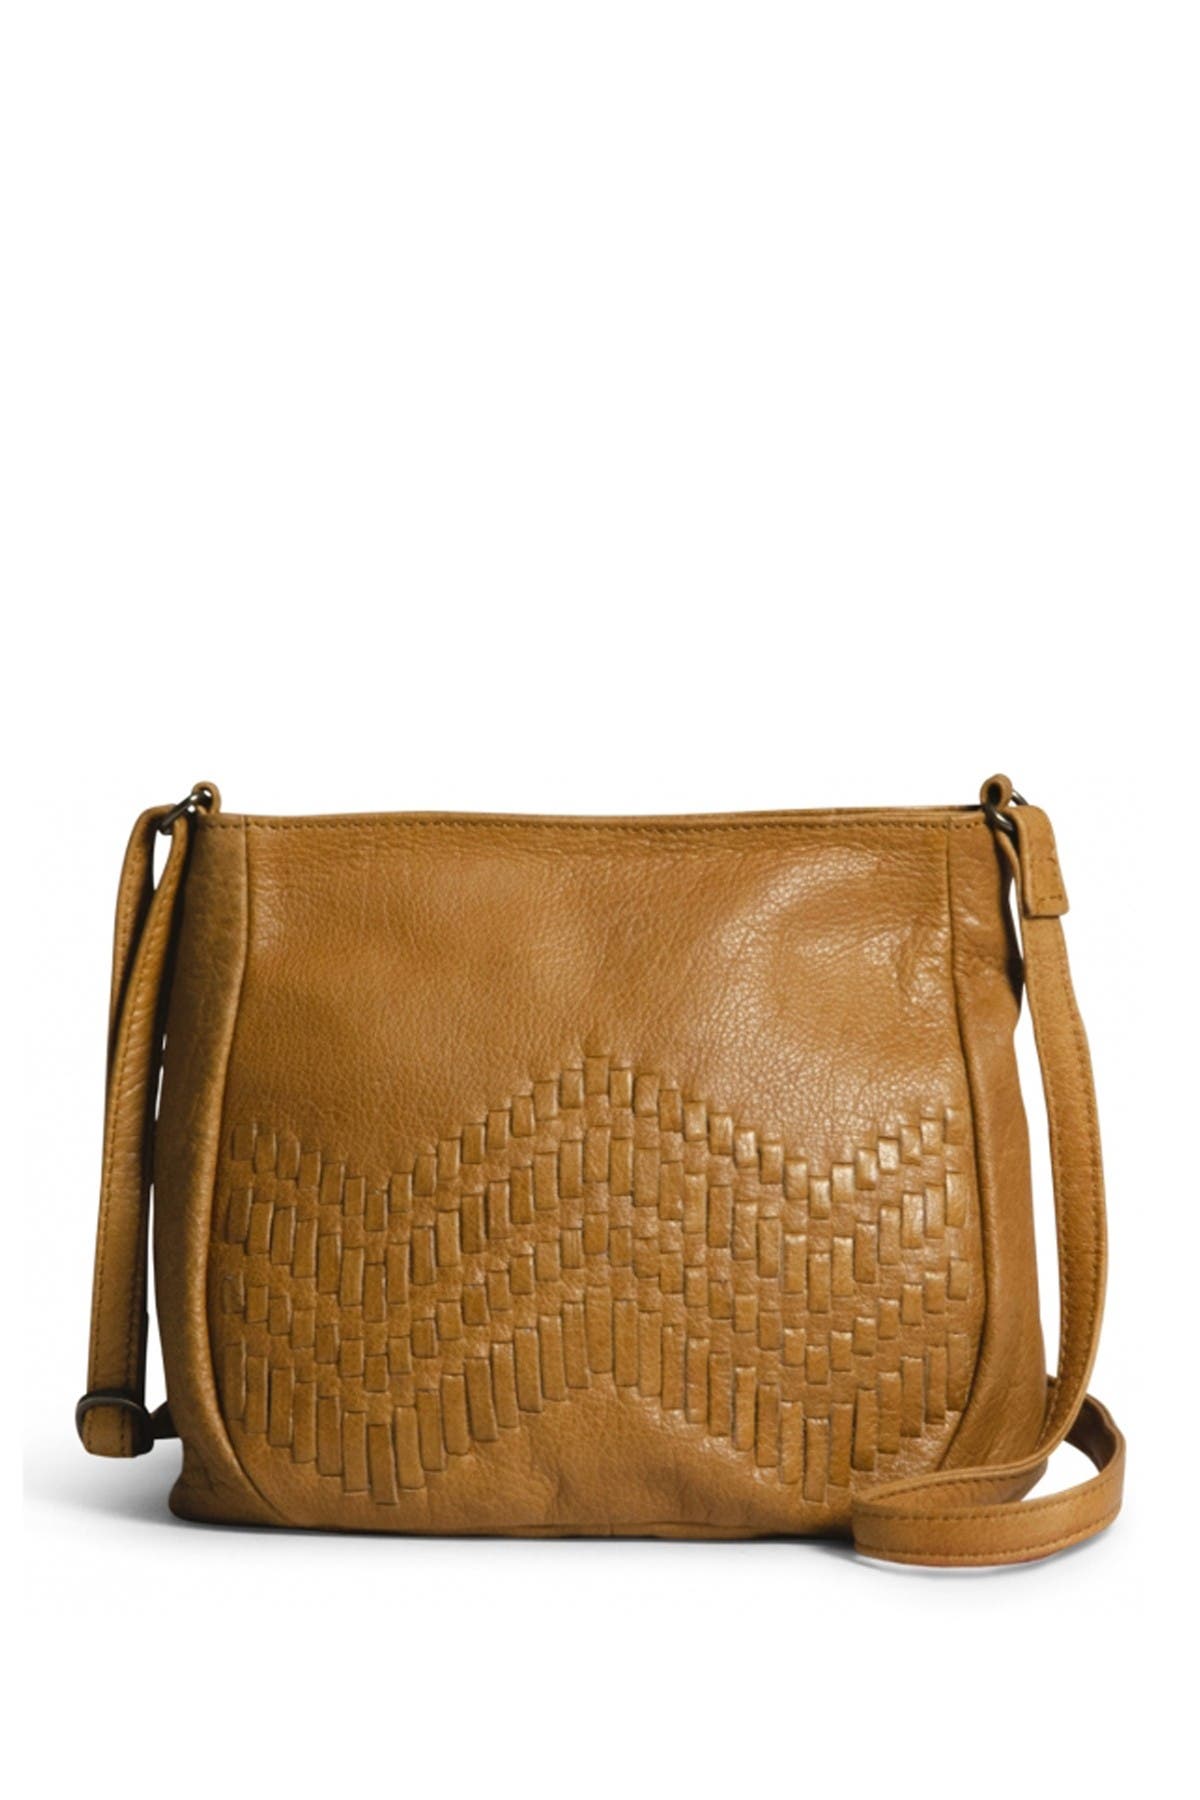 Day & Mood Peony Woven Leather Crossbody Bag In Whiskey | ModeSens